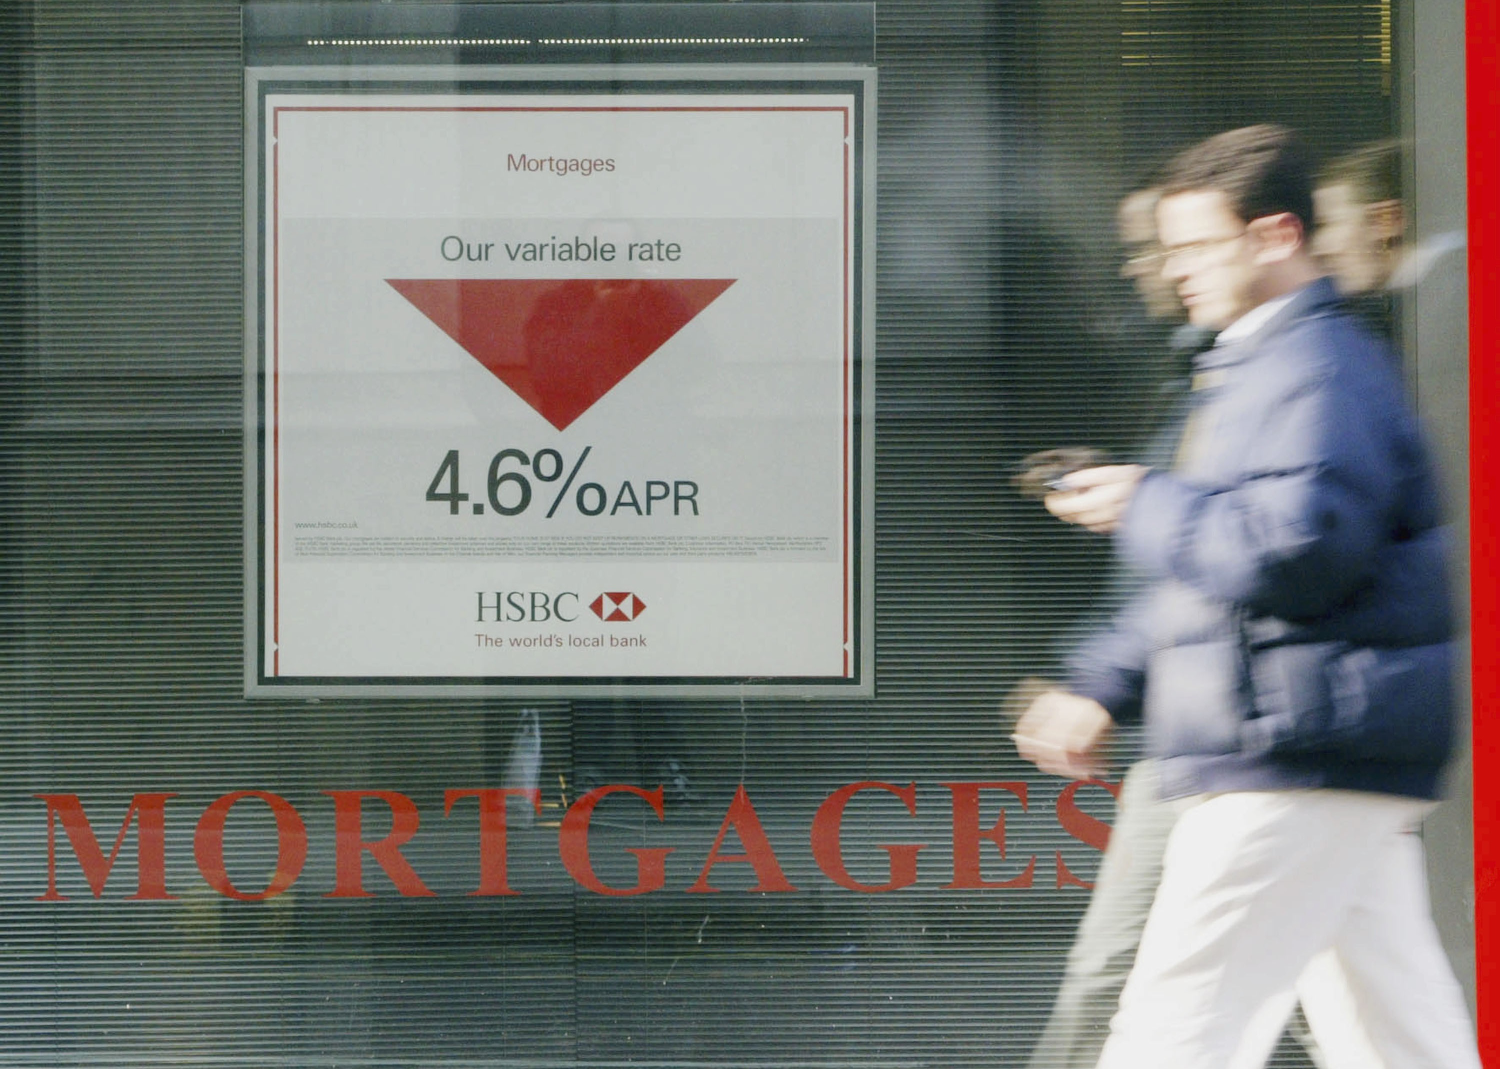 80’s era photograph of a mortgage advertisement displaying a 4.6% APR rate - Graeme Robertson // Getty Images